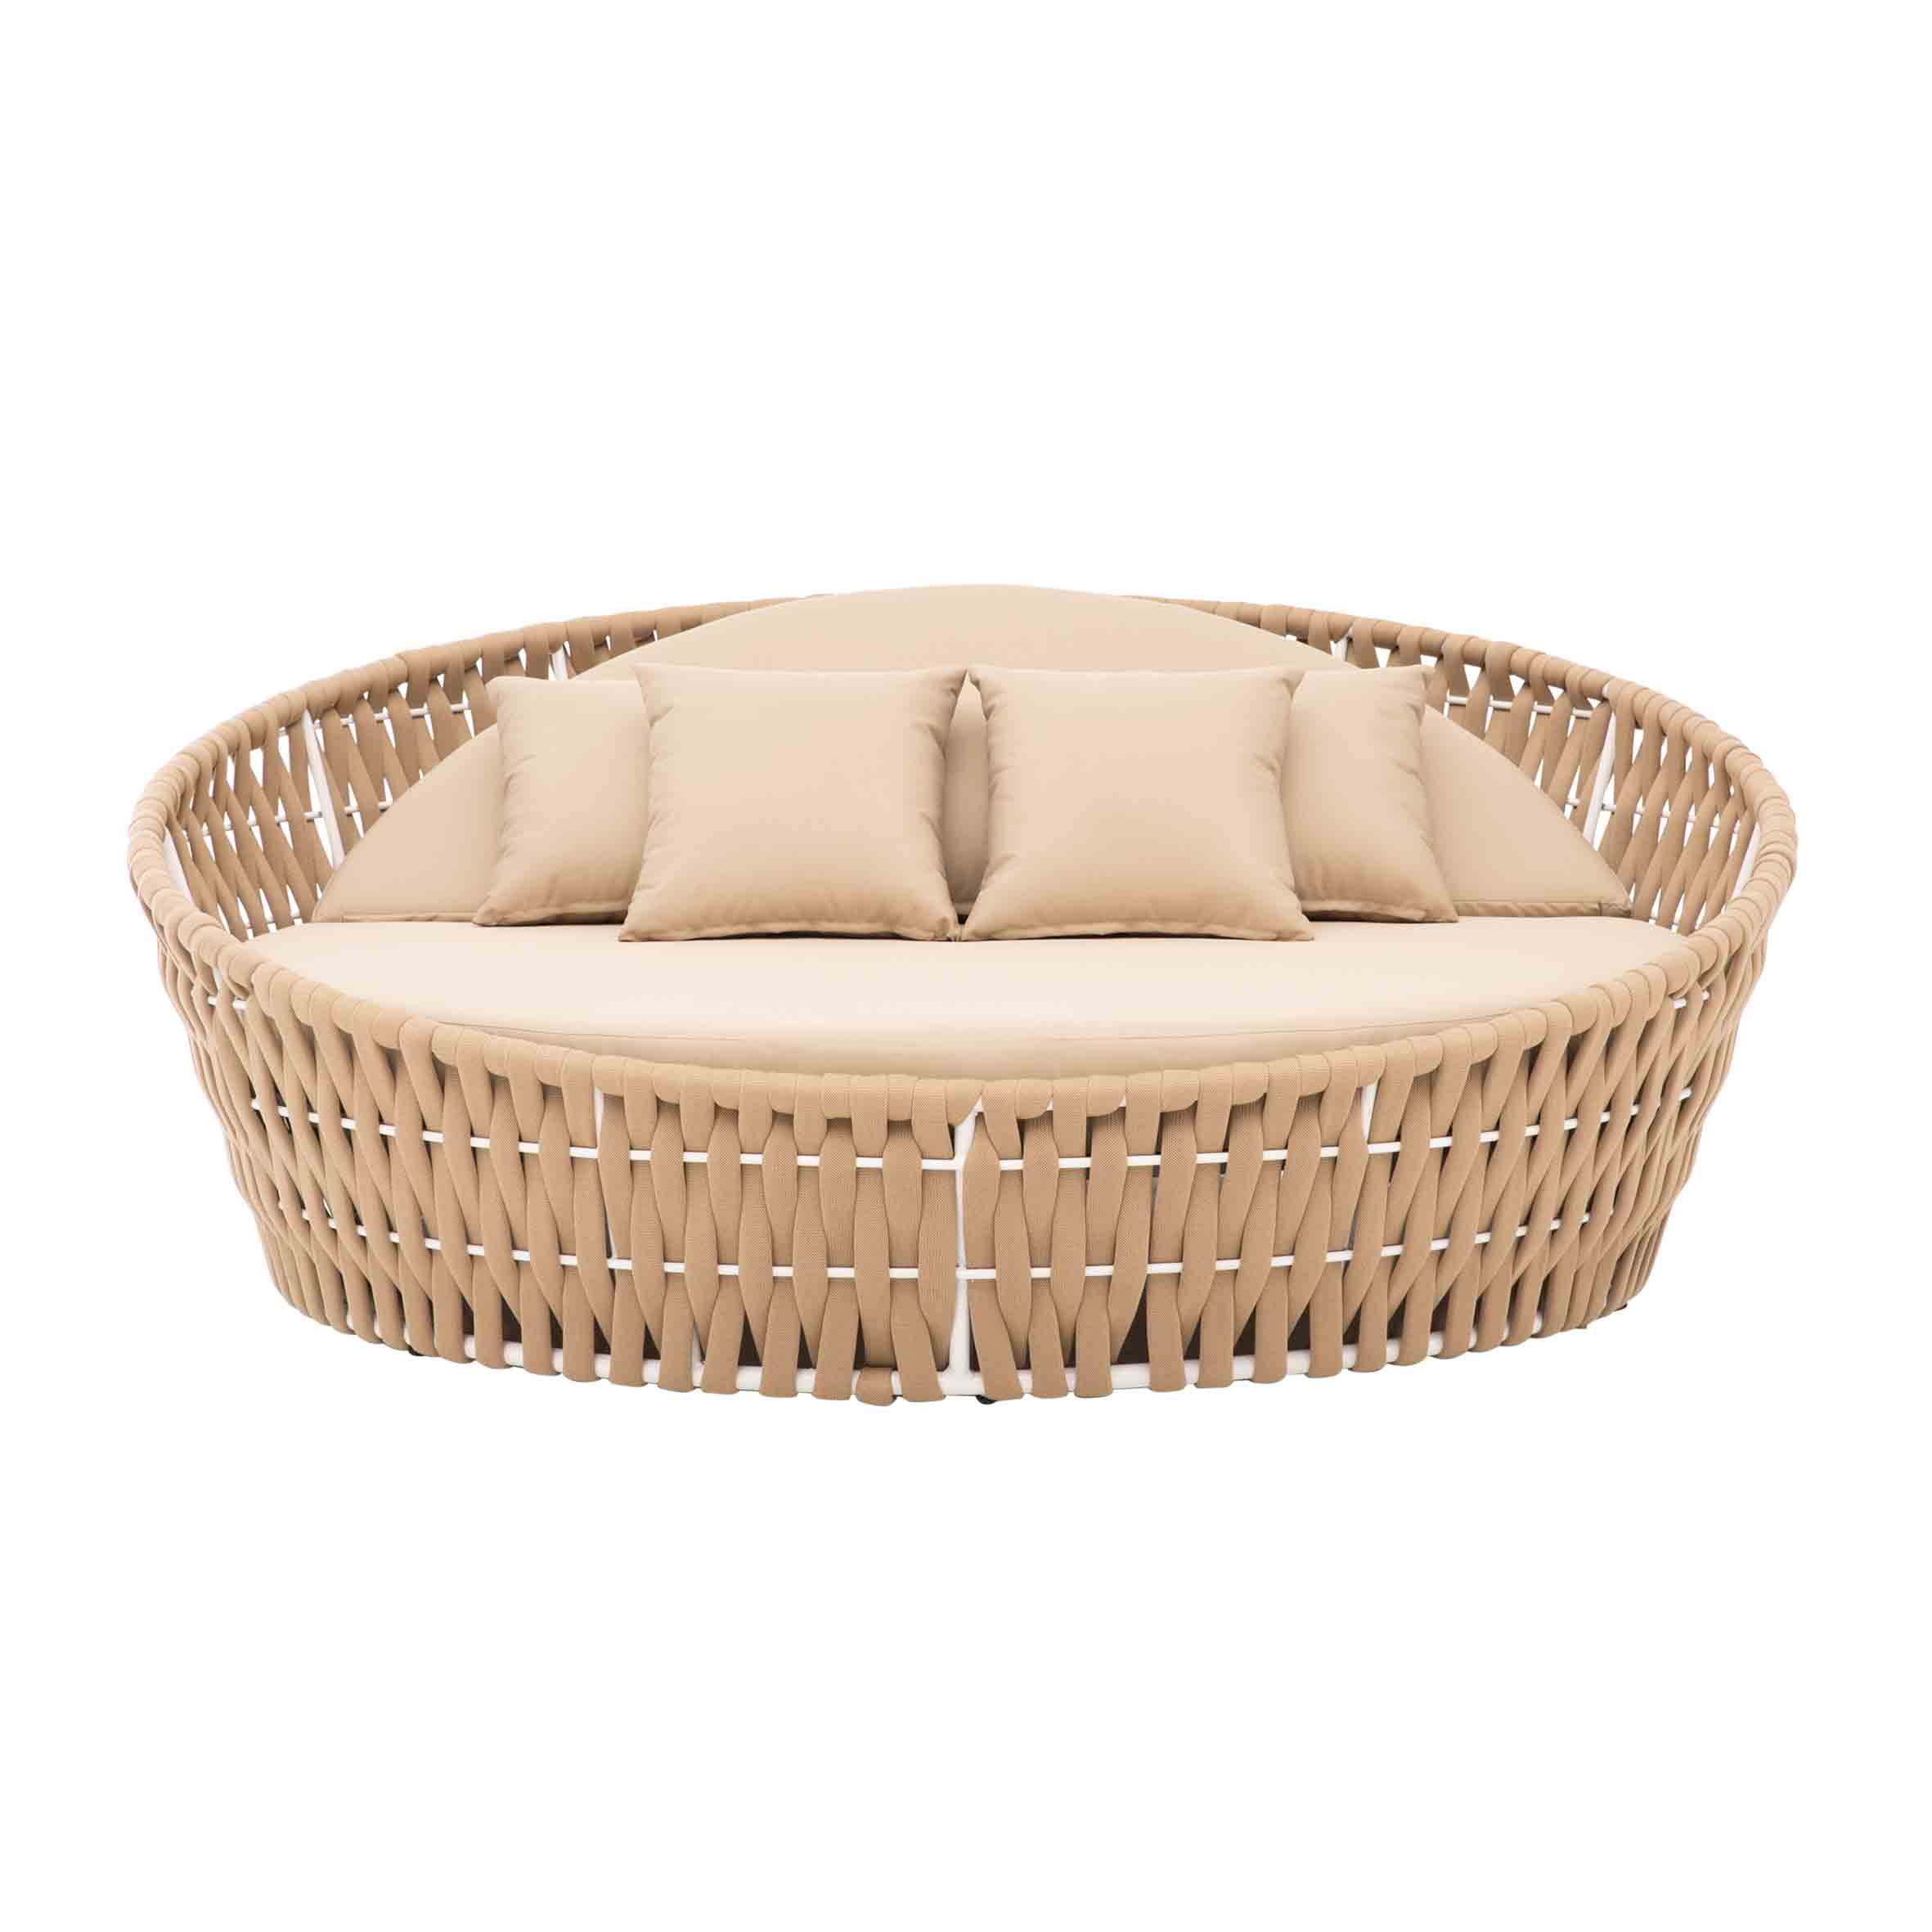 Art rope round daybed S4